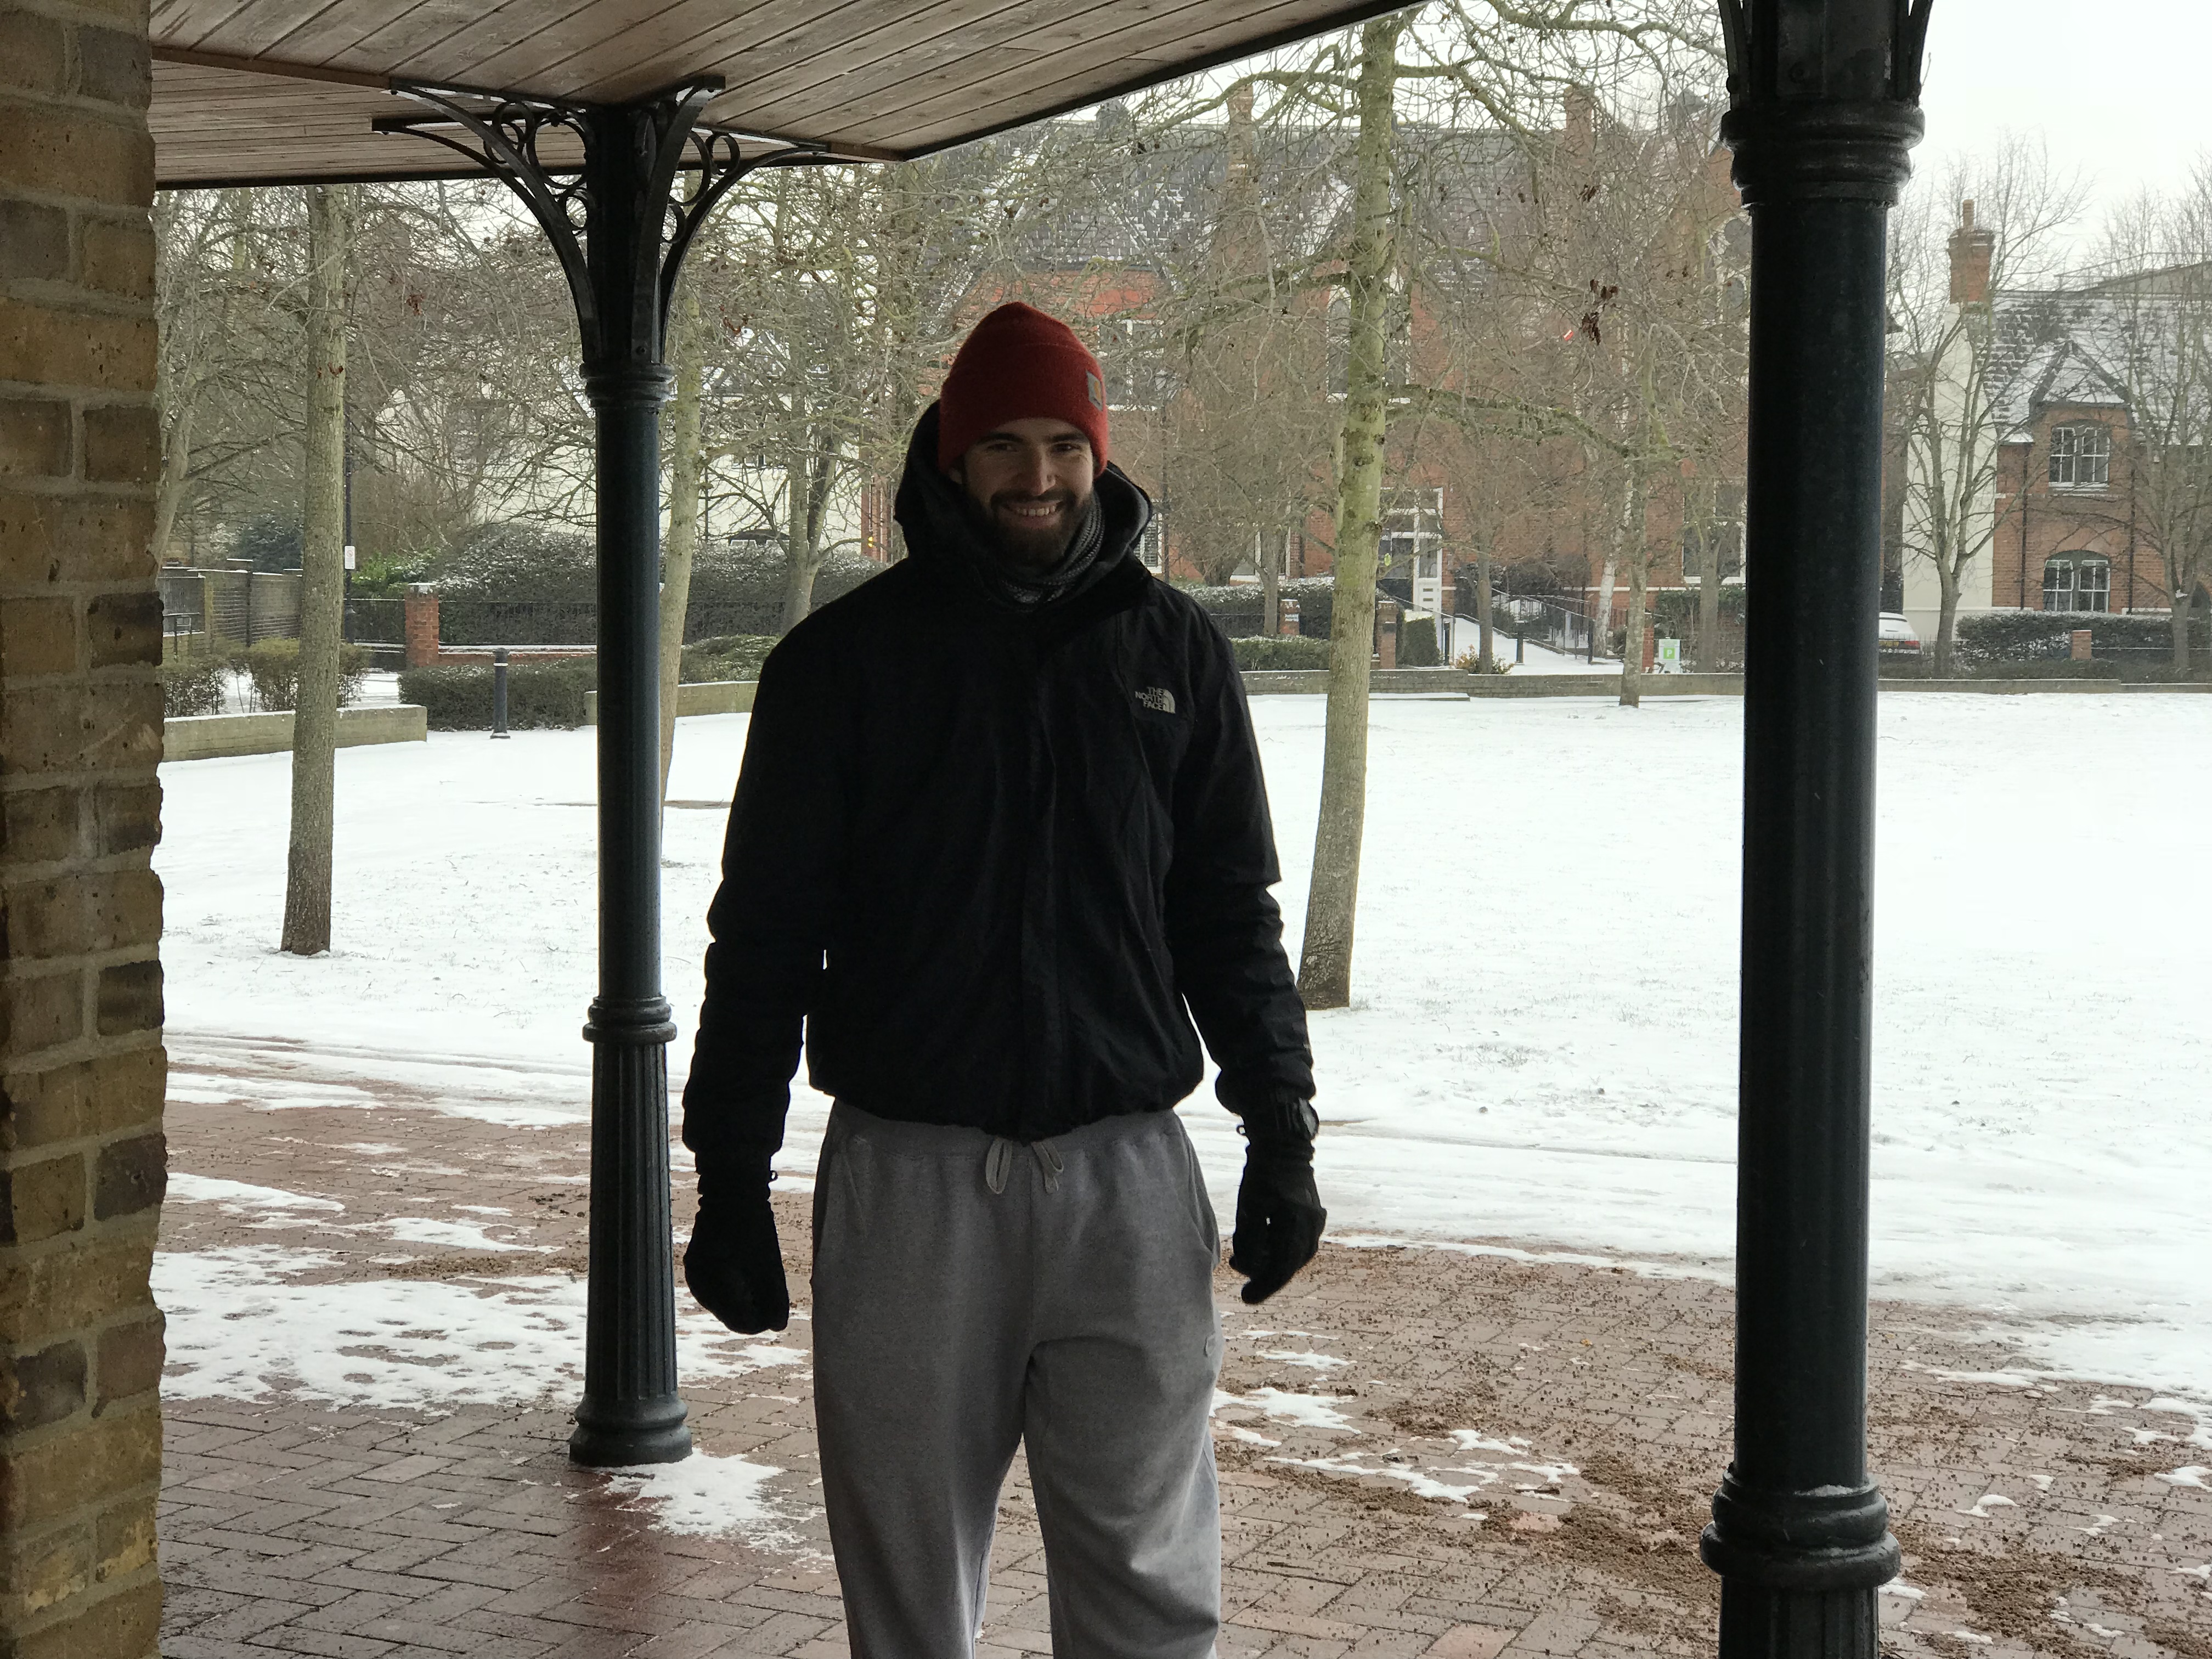 Bad weather: working outside in the snow as a personal trainer